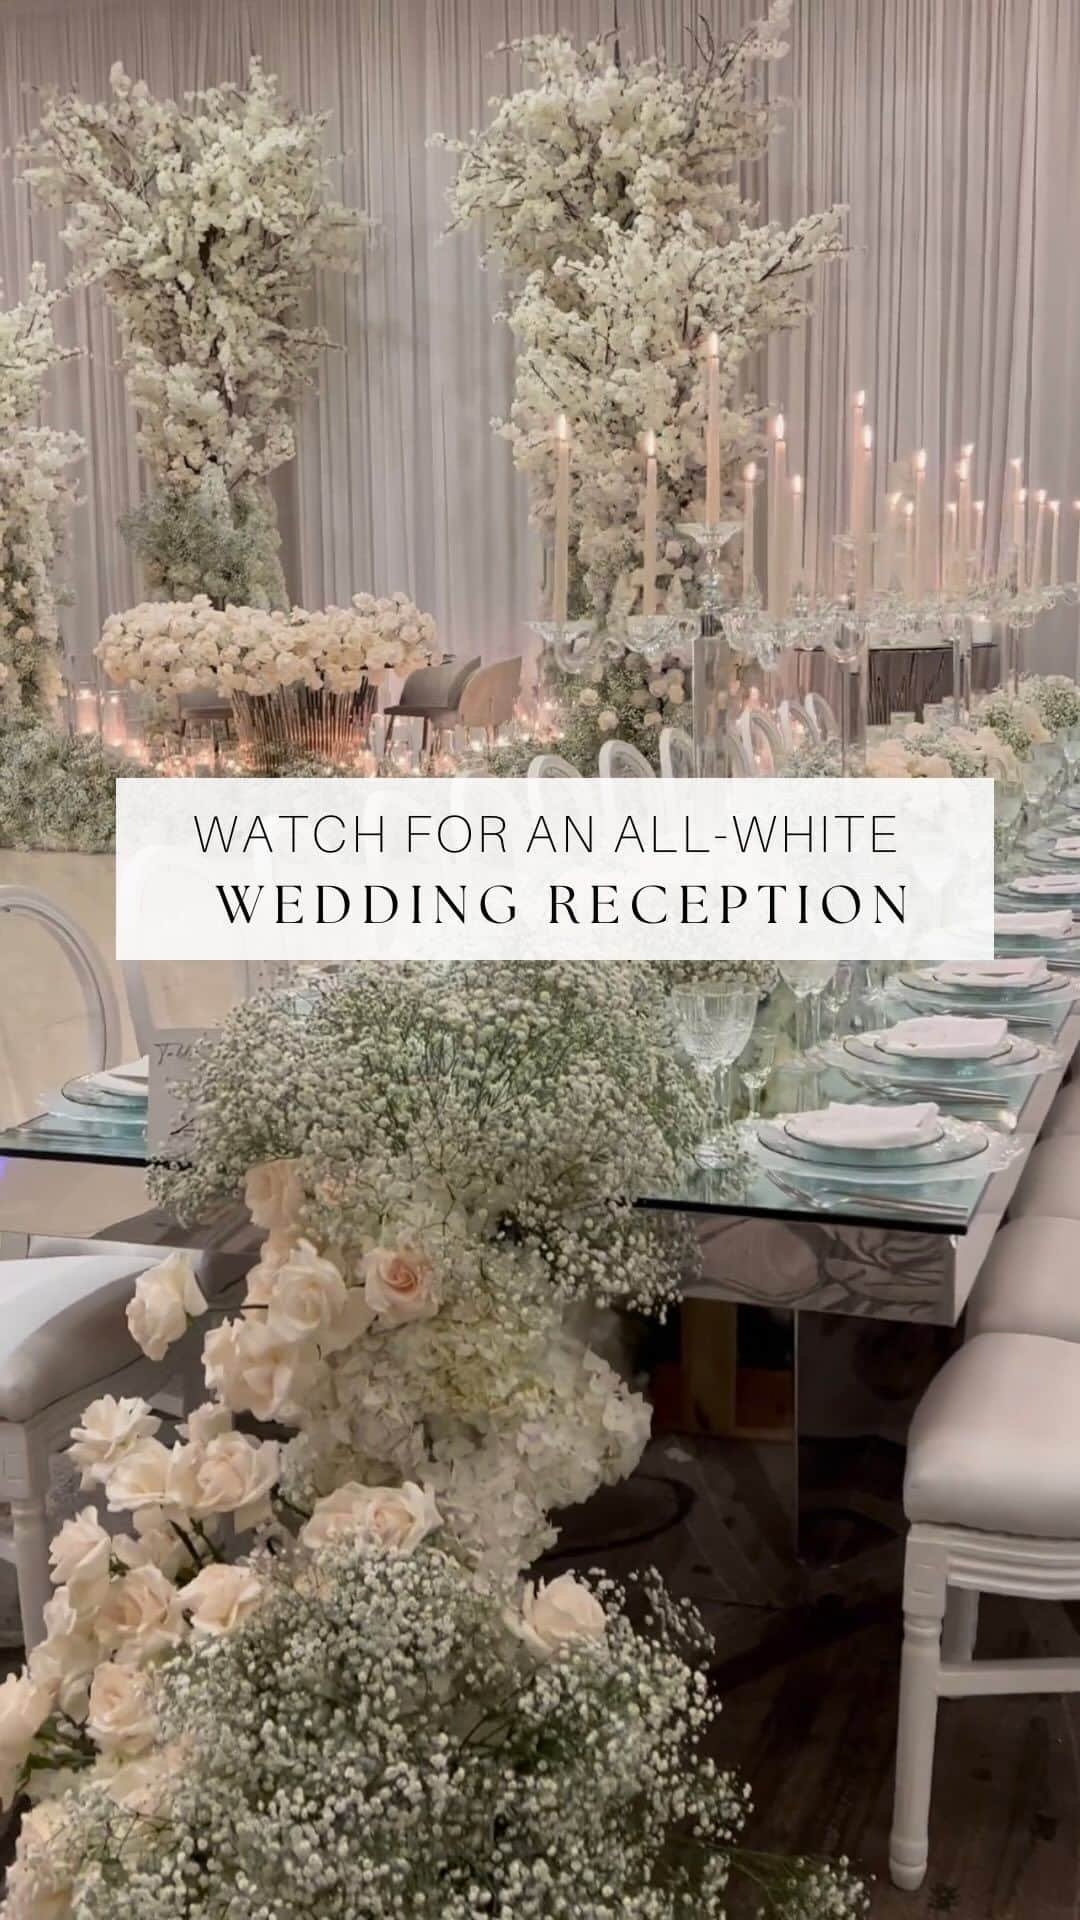 WEDDING APPARELのインスタグラム：「Consider this to be your sign to opt for an all-white wedding reception ✨ Textured floral installations, glamorous details and a modern aesthetic truly make this design otherworldly!  Love it as much as we do? Drop a 🤍 in the comments!  Planner: @_marry_michelle Venue: @renaissancevenue  #weddinginspo #modernwedding  #weddingplanning #weddingreceptiondecor #weddingtable  #weddingreception  #weddingdetails #weddingdecor #receptiondecor  #weddingday #weddingideas #weddingdecoration #weddinginspiration #weddingflowers #whitewedding #indoorwedding #glamwedding #bridgerton #weddings  #classicwedding #eventdesign #weddingphotography #eventdecor  #weddingdetails #weddingwednesday  #luxurywedding」